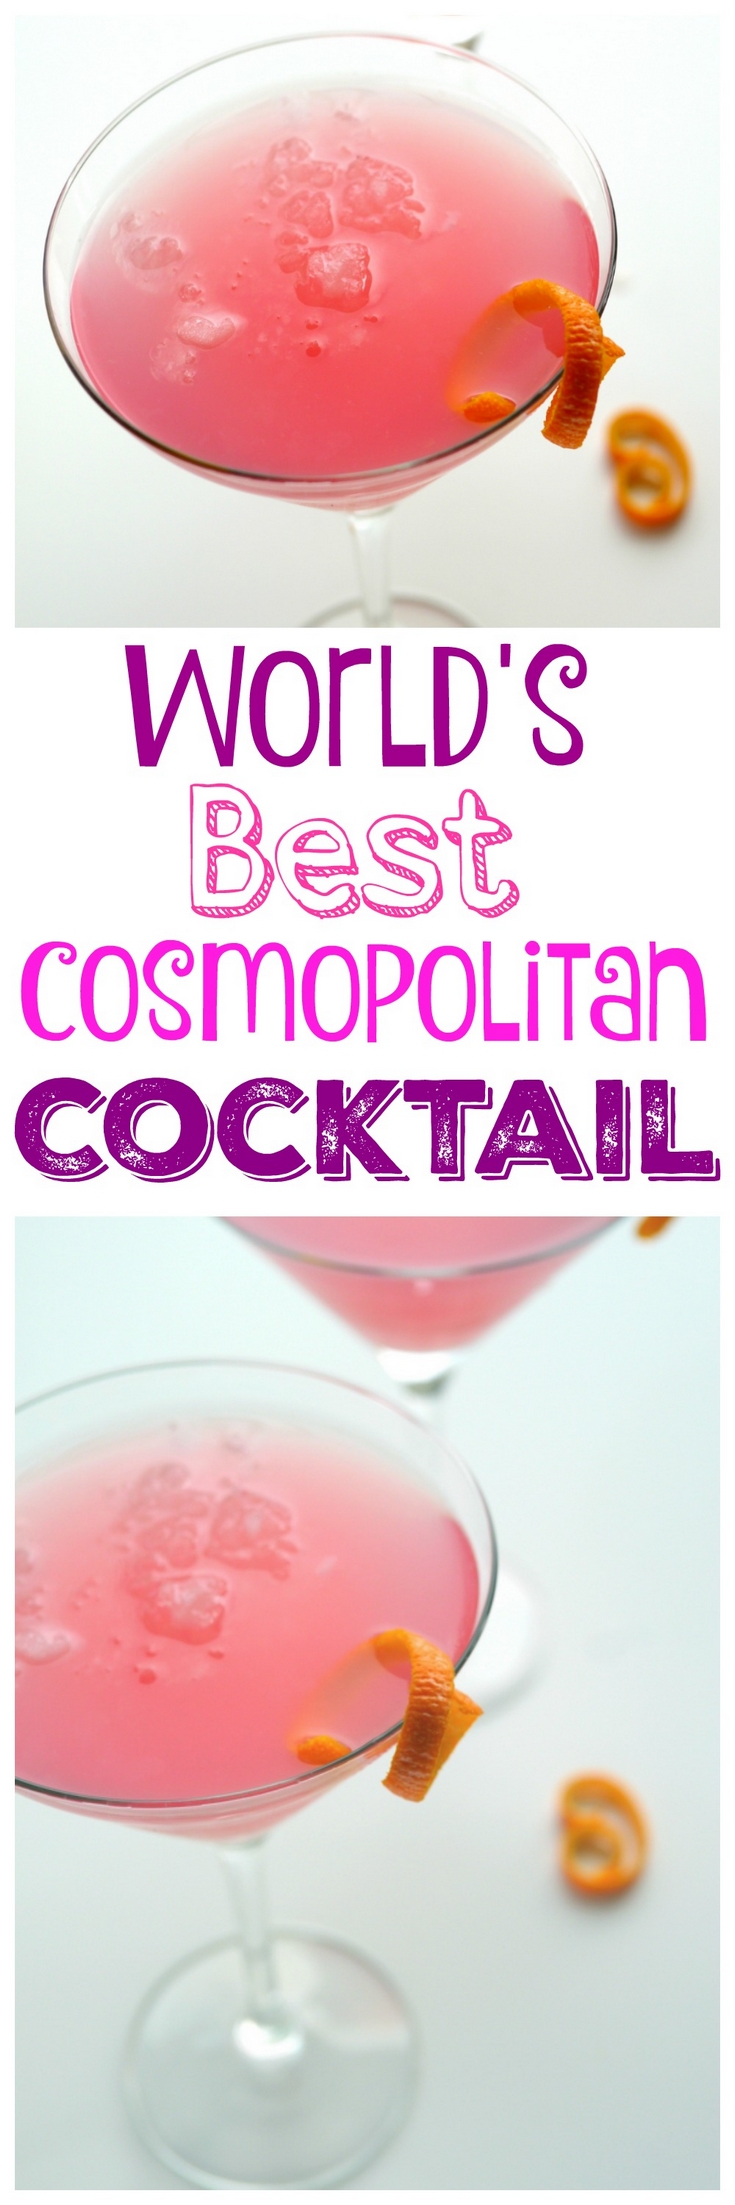 Why would you want to drink anything other than the World's Best Cosmopolitan Cocktail? The only thing girly about this cosmo recipe is its color. via @cmpollak1